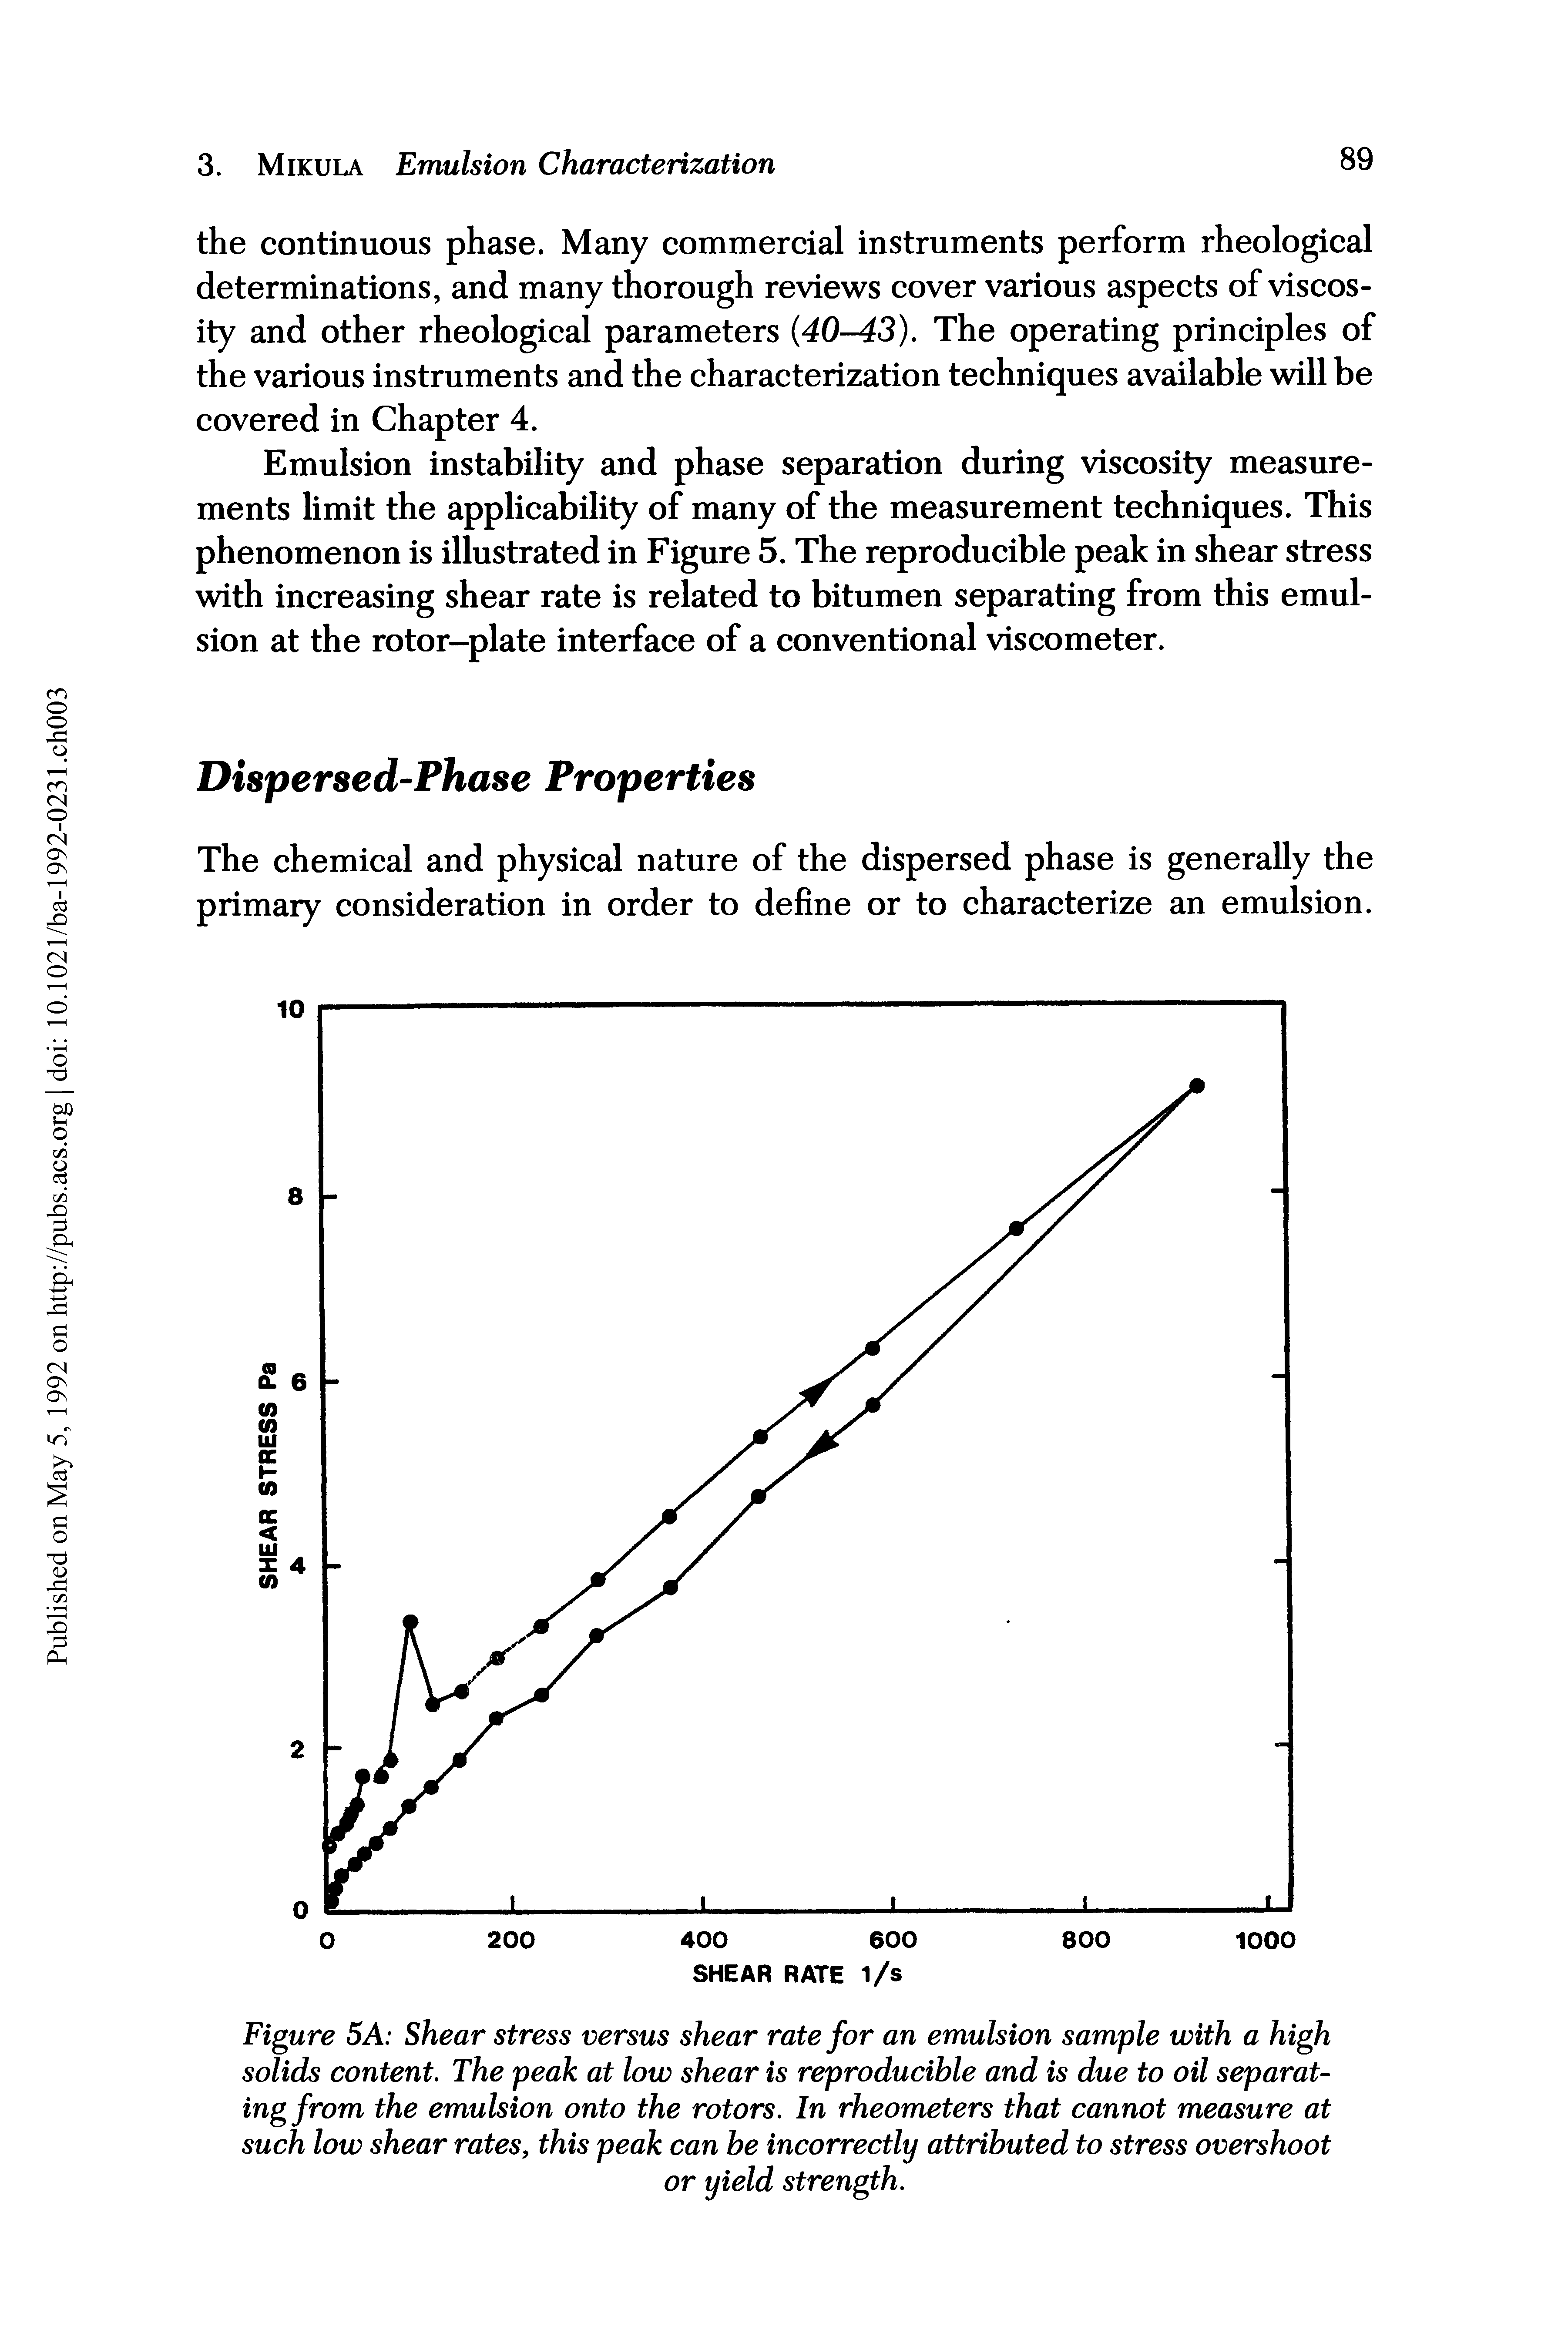 Figure 5A Shear stress versus shear rate for an emulsion sample with a high solids content. The peak at low shear is reproducible and is due to oil separating from the emulsion onto the rotors. In rheometers that cannot measure at such low shear rates, this peak can be incorrectly attributed to stress overshoot...